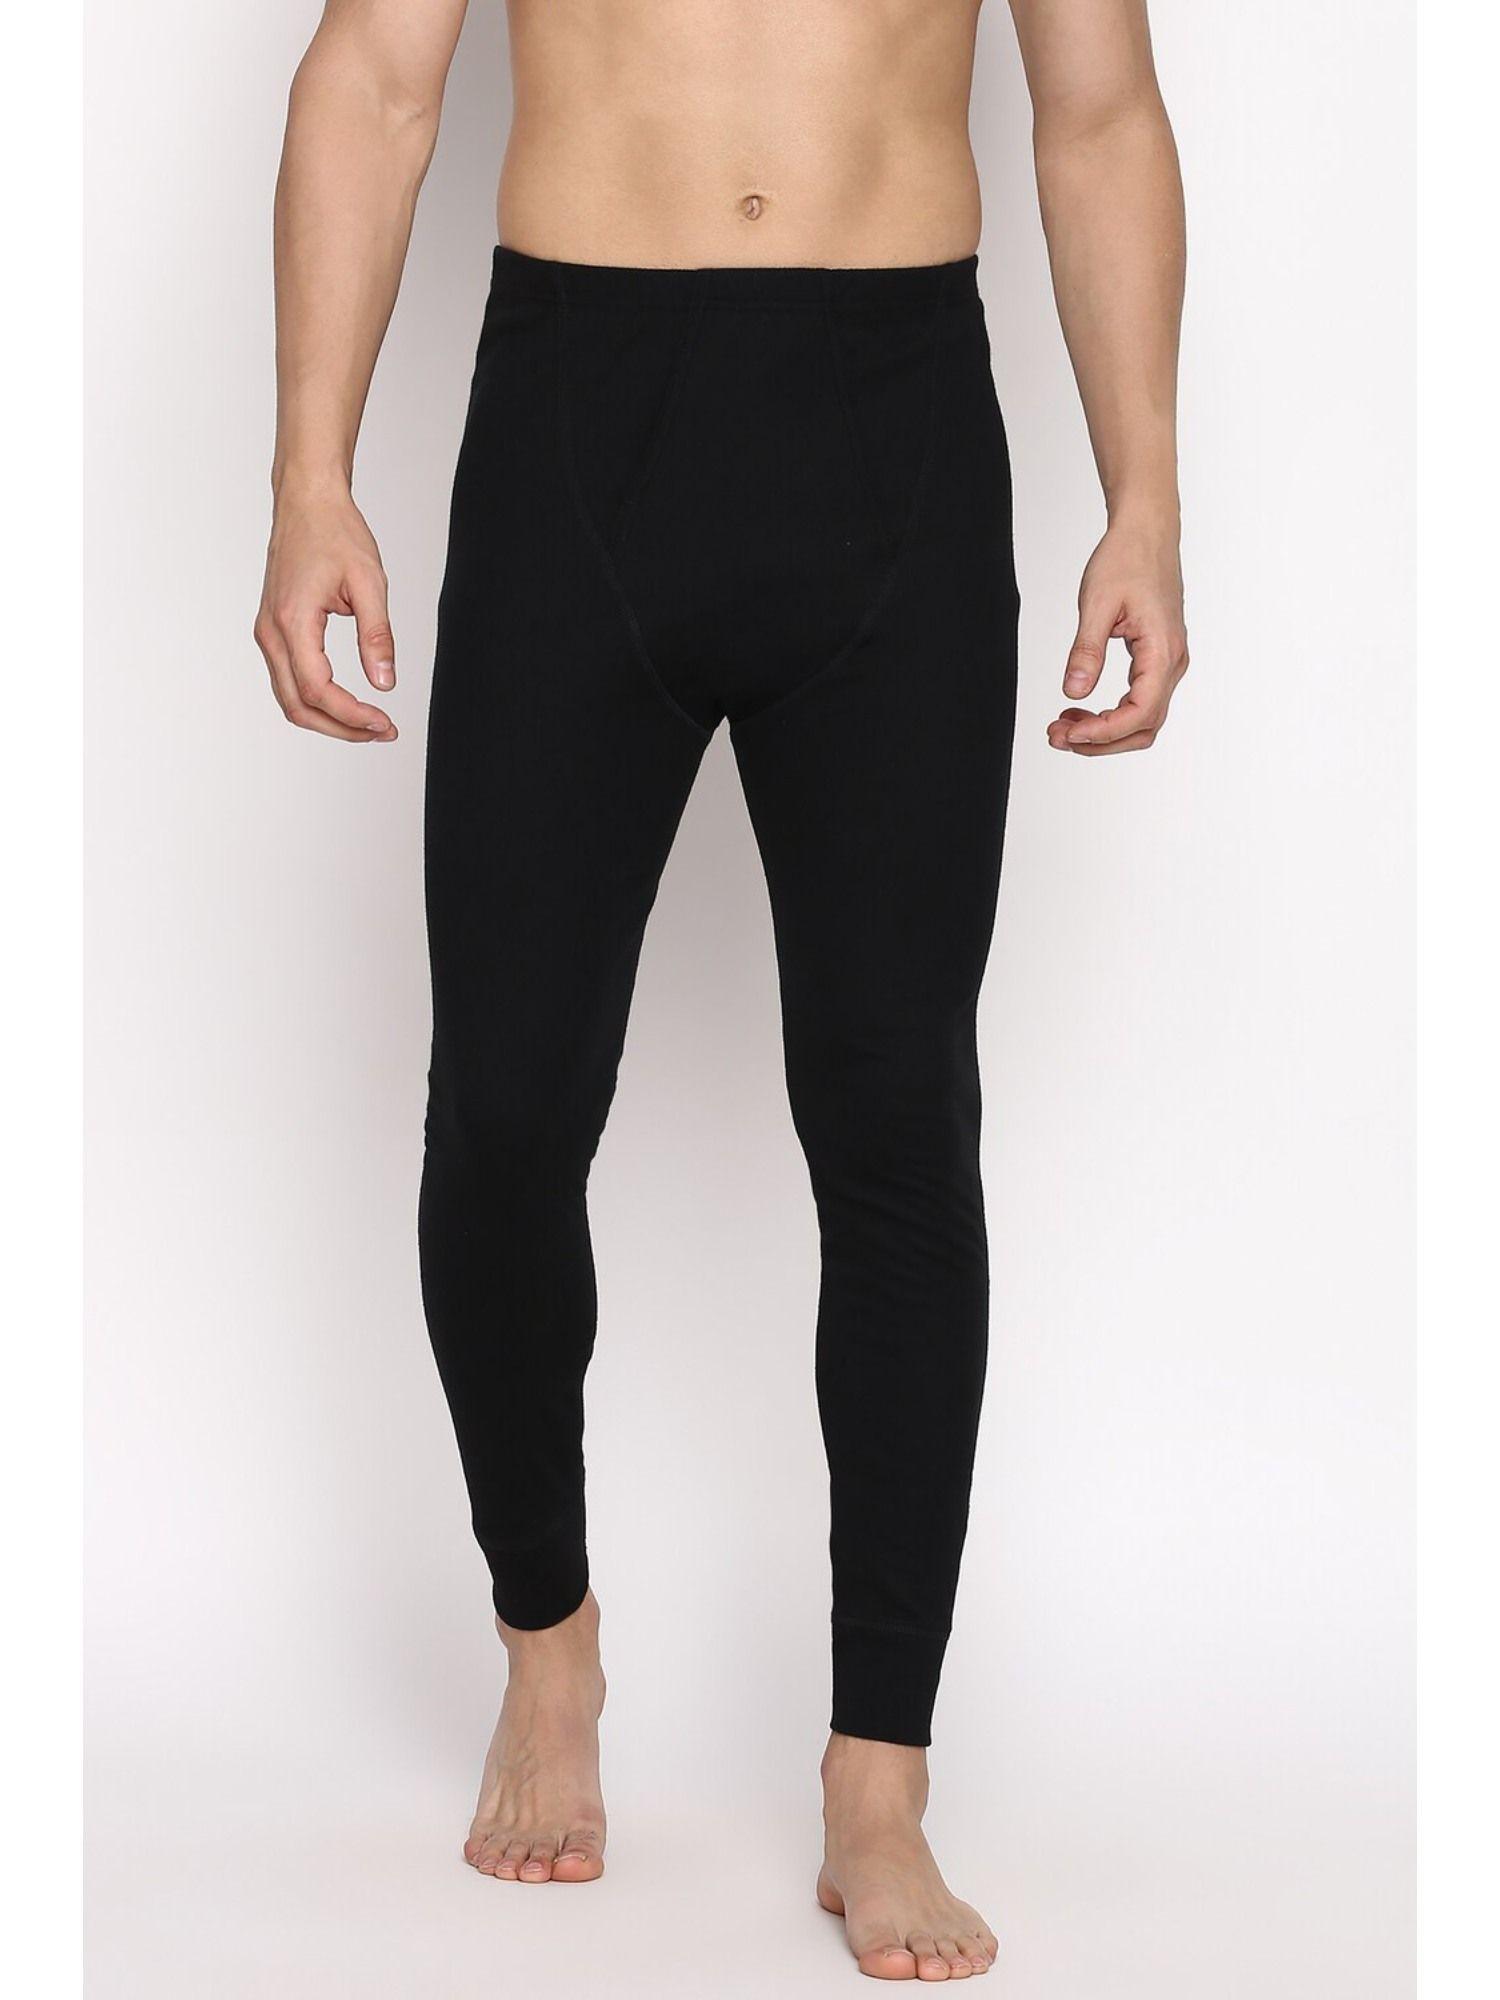 men-warmtech-thermal-bottom-anti-bacterial-and-moisture-wicking